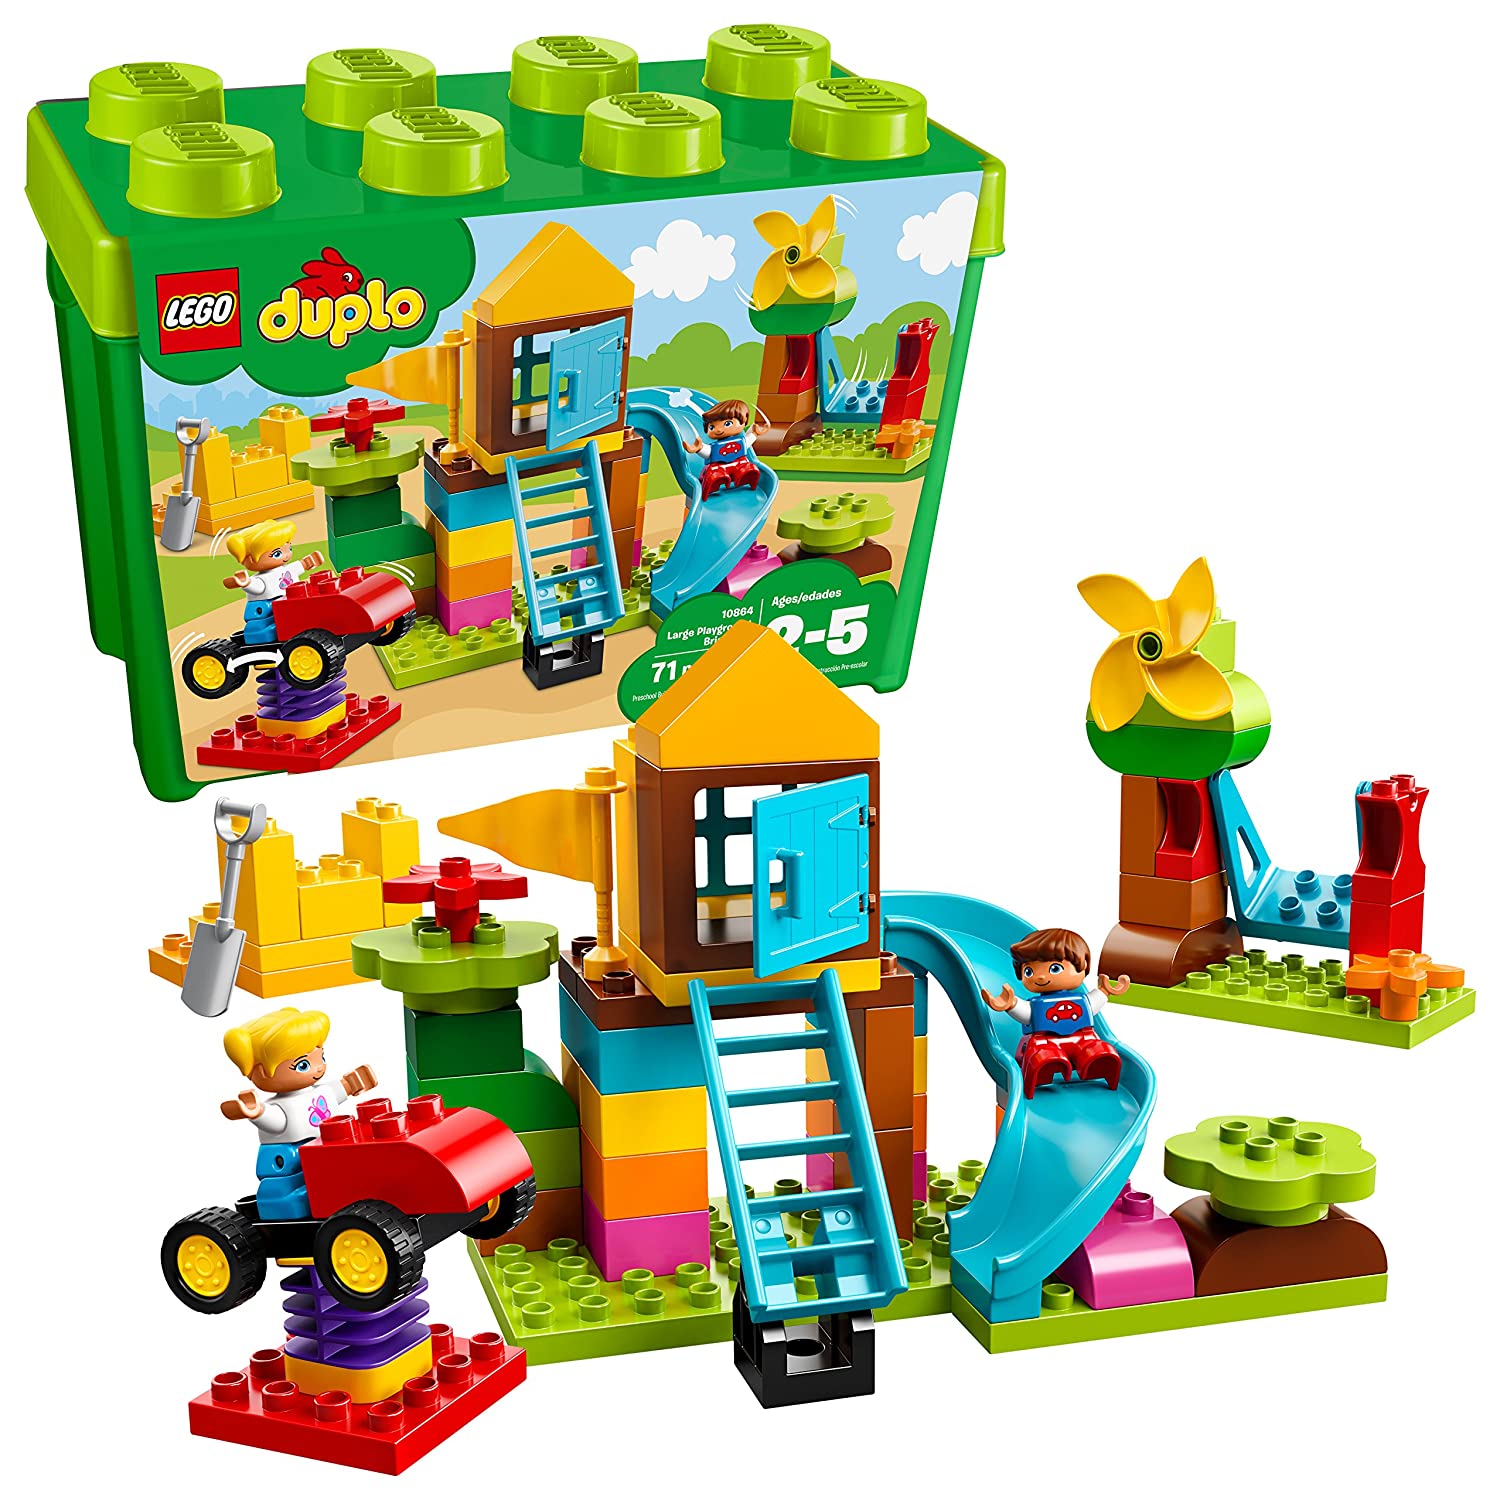 Top 9 Best Lego Duplo Sets Reviews in 2022 2